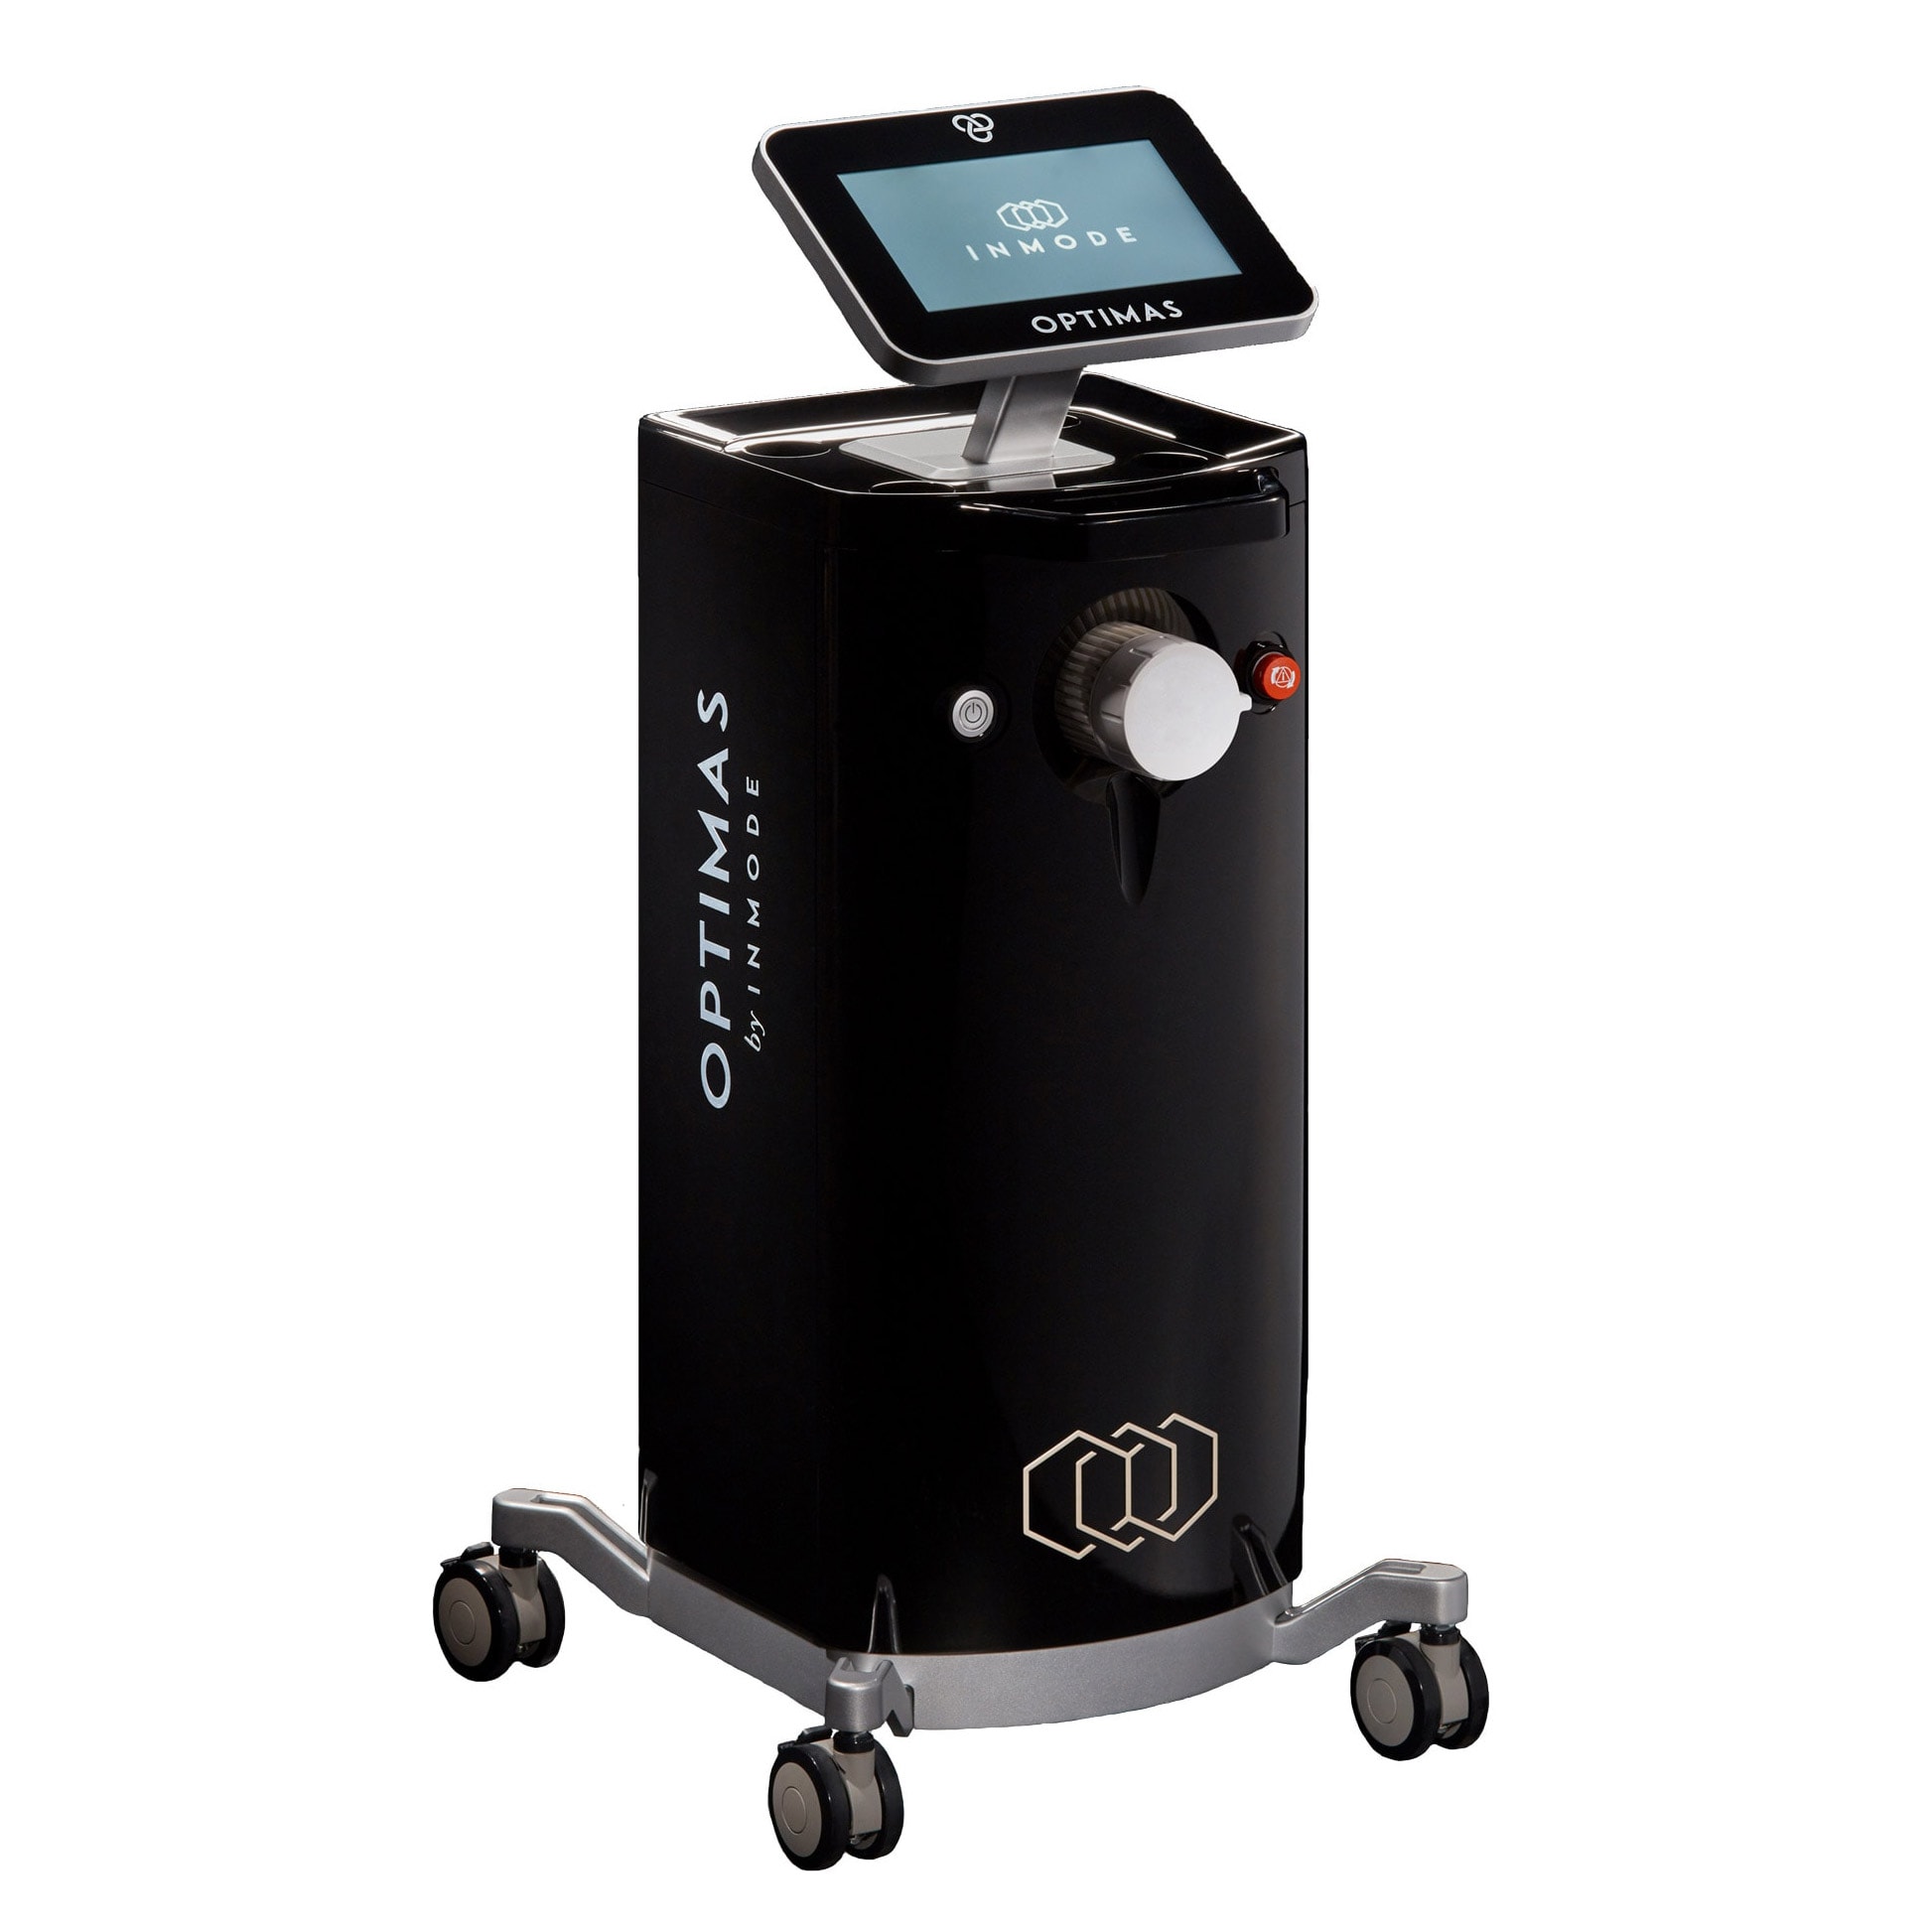 The Optimas workstation features Morpheus8, Lumecca and Forma for skin tightening, fat reduction, acne, sunspots, and scars